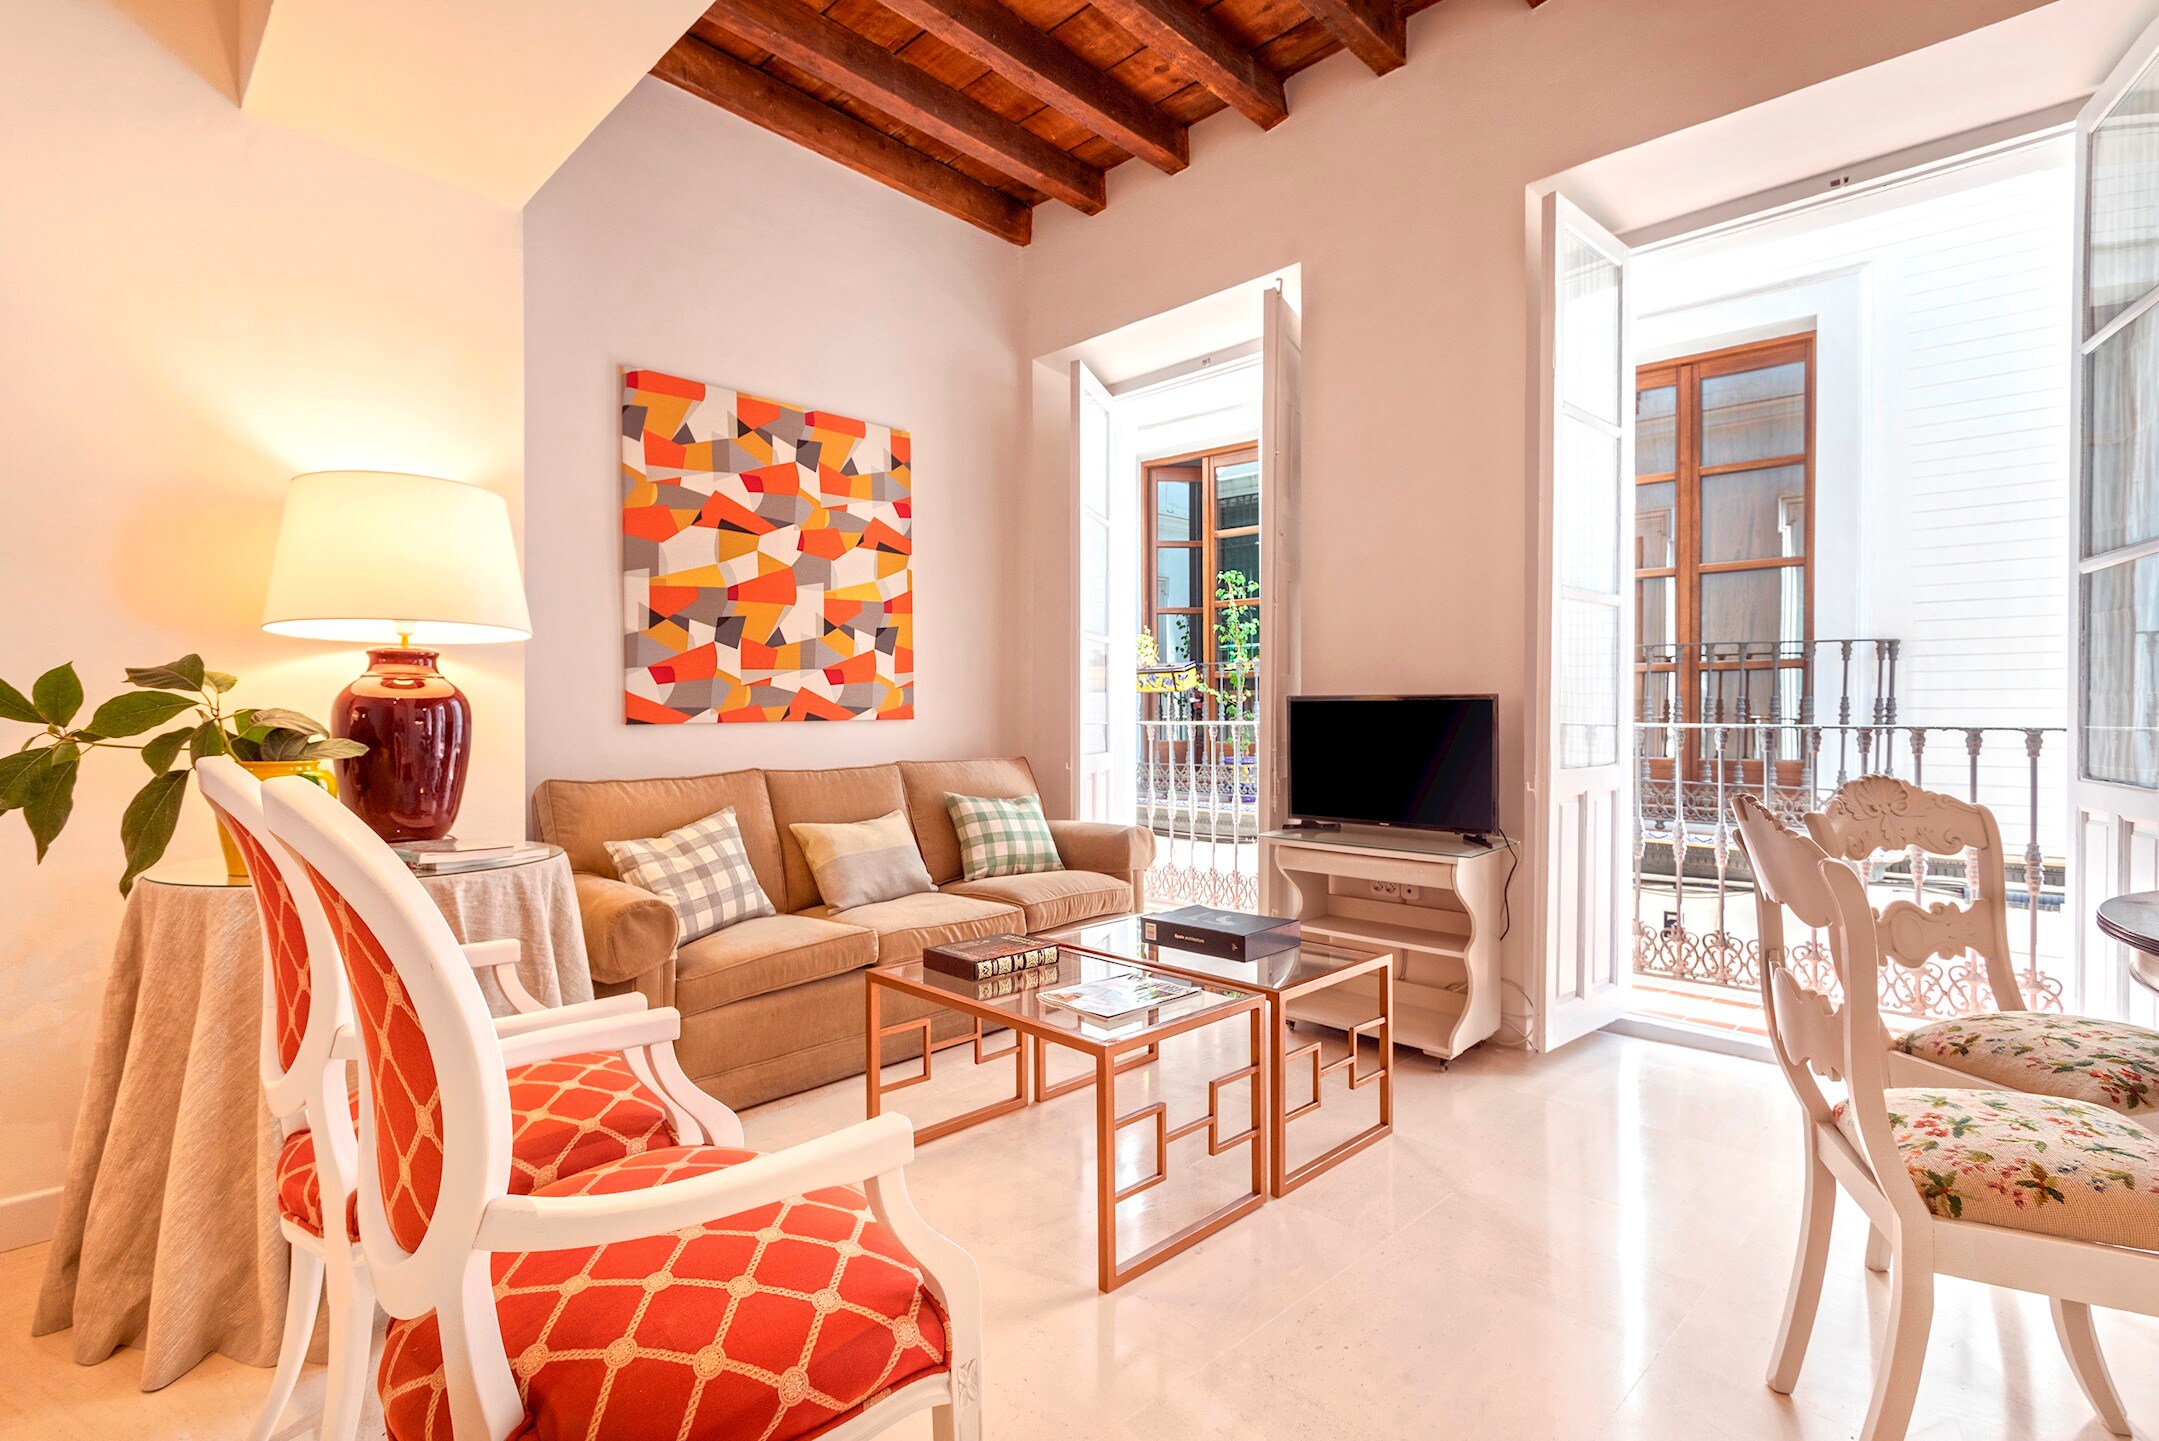 Property Image 1 - Amazing 4bd house with terrace near Cathedral. Mateos Gago Terrace VI